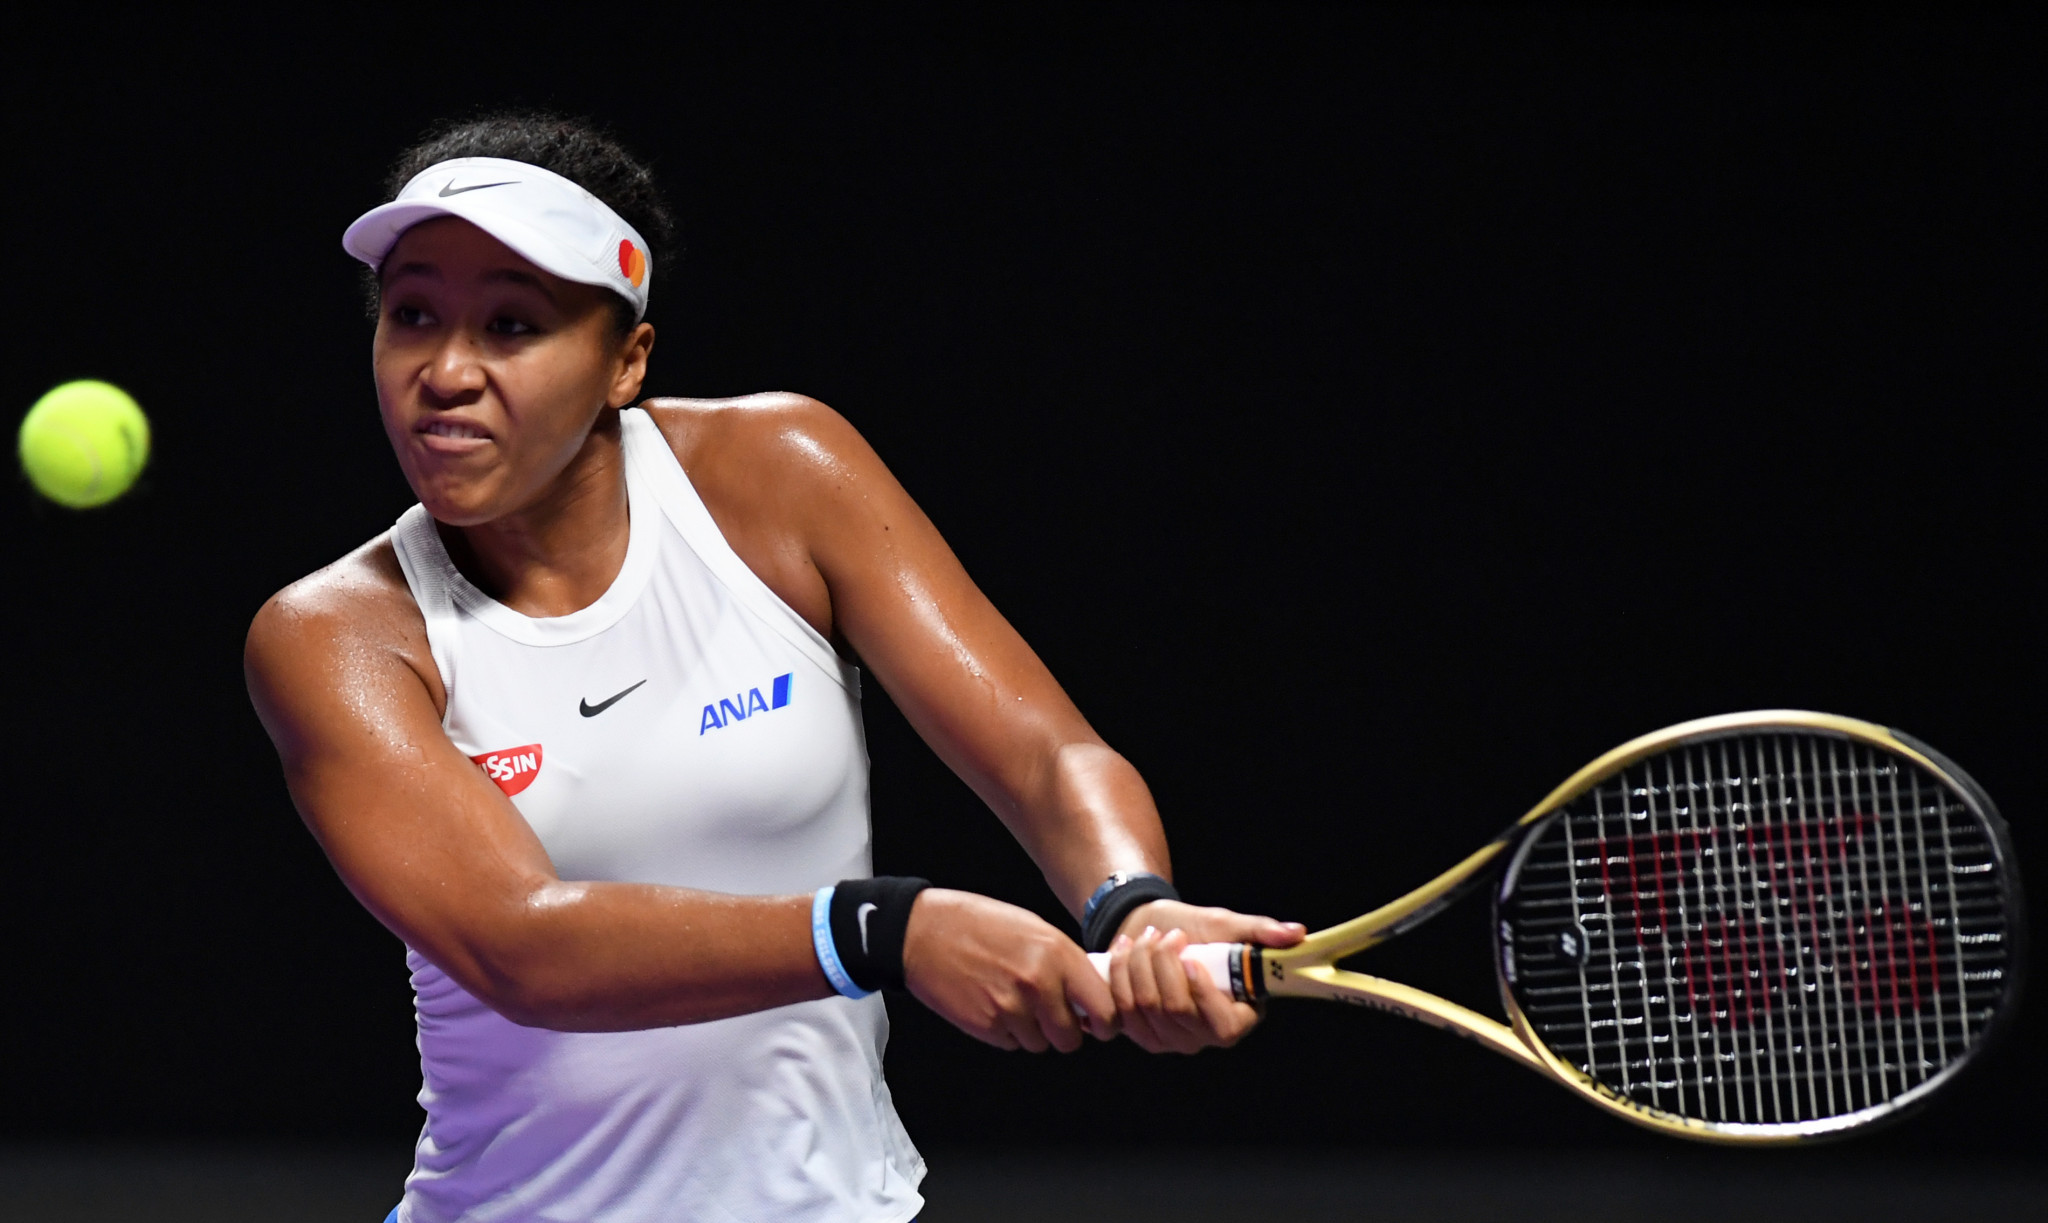 Naomi Osaka of Japan was triumphant in her first match of the WTA Finals ©WTA Finals